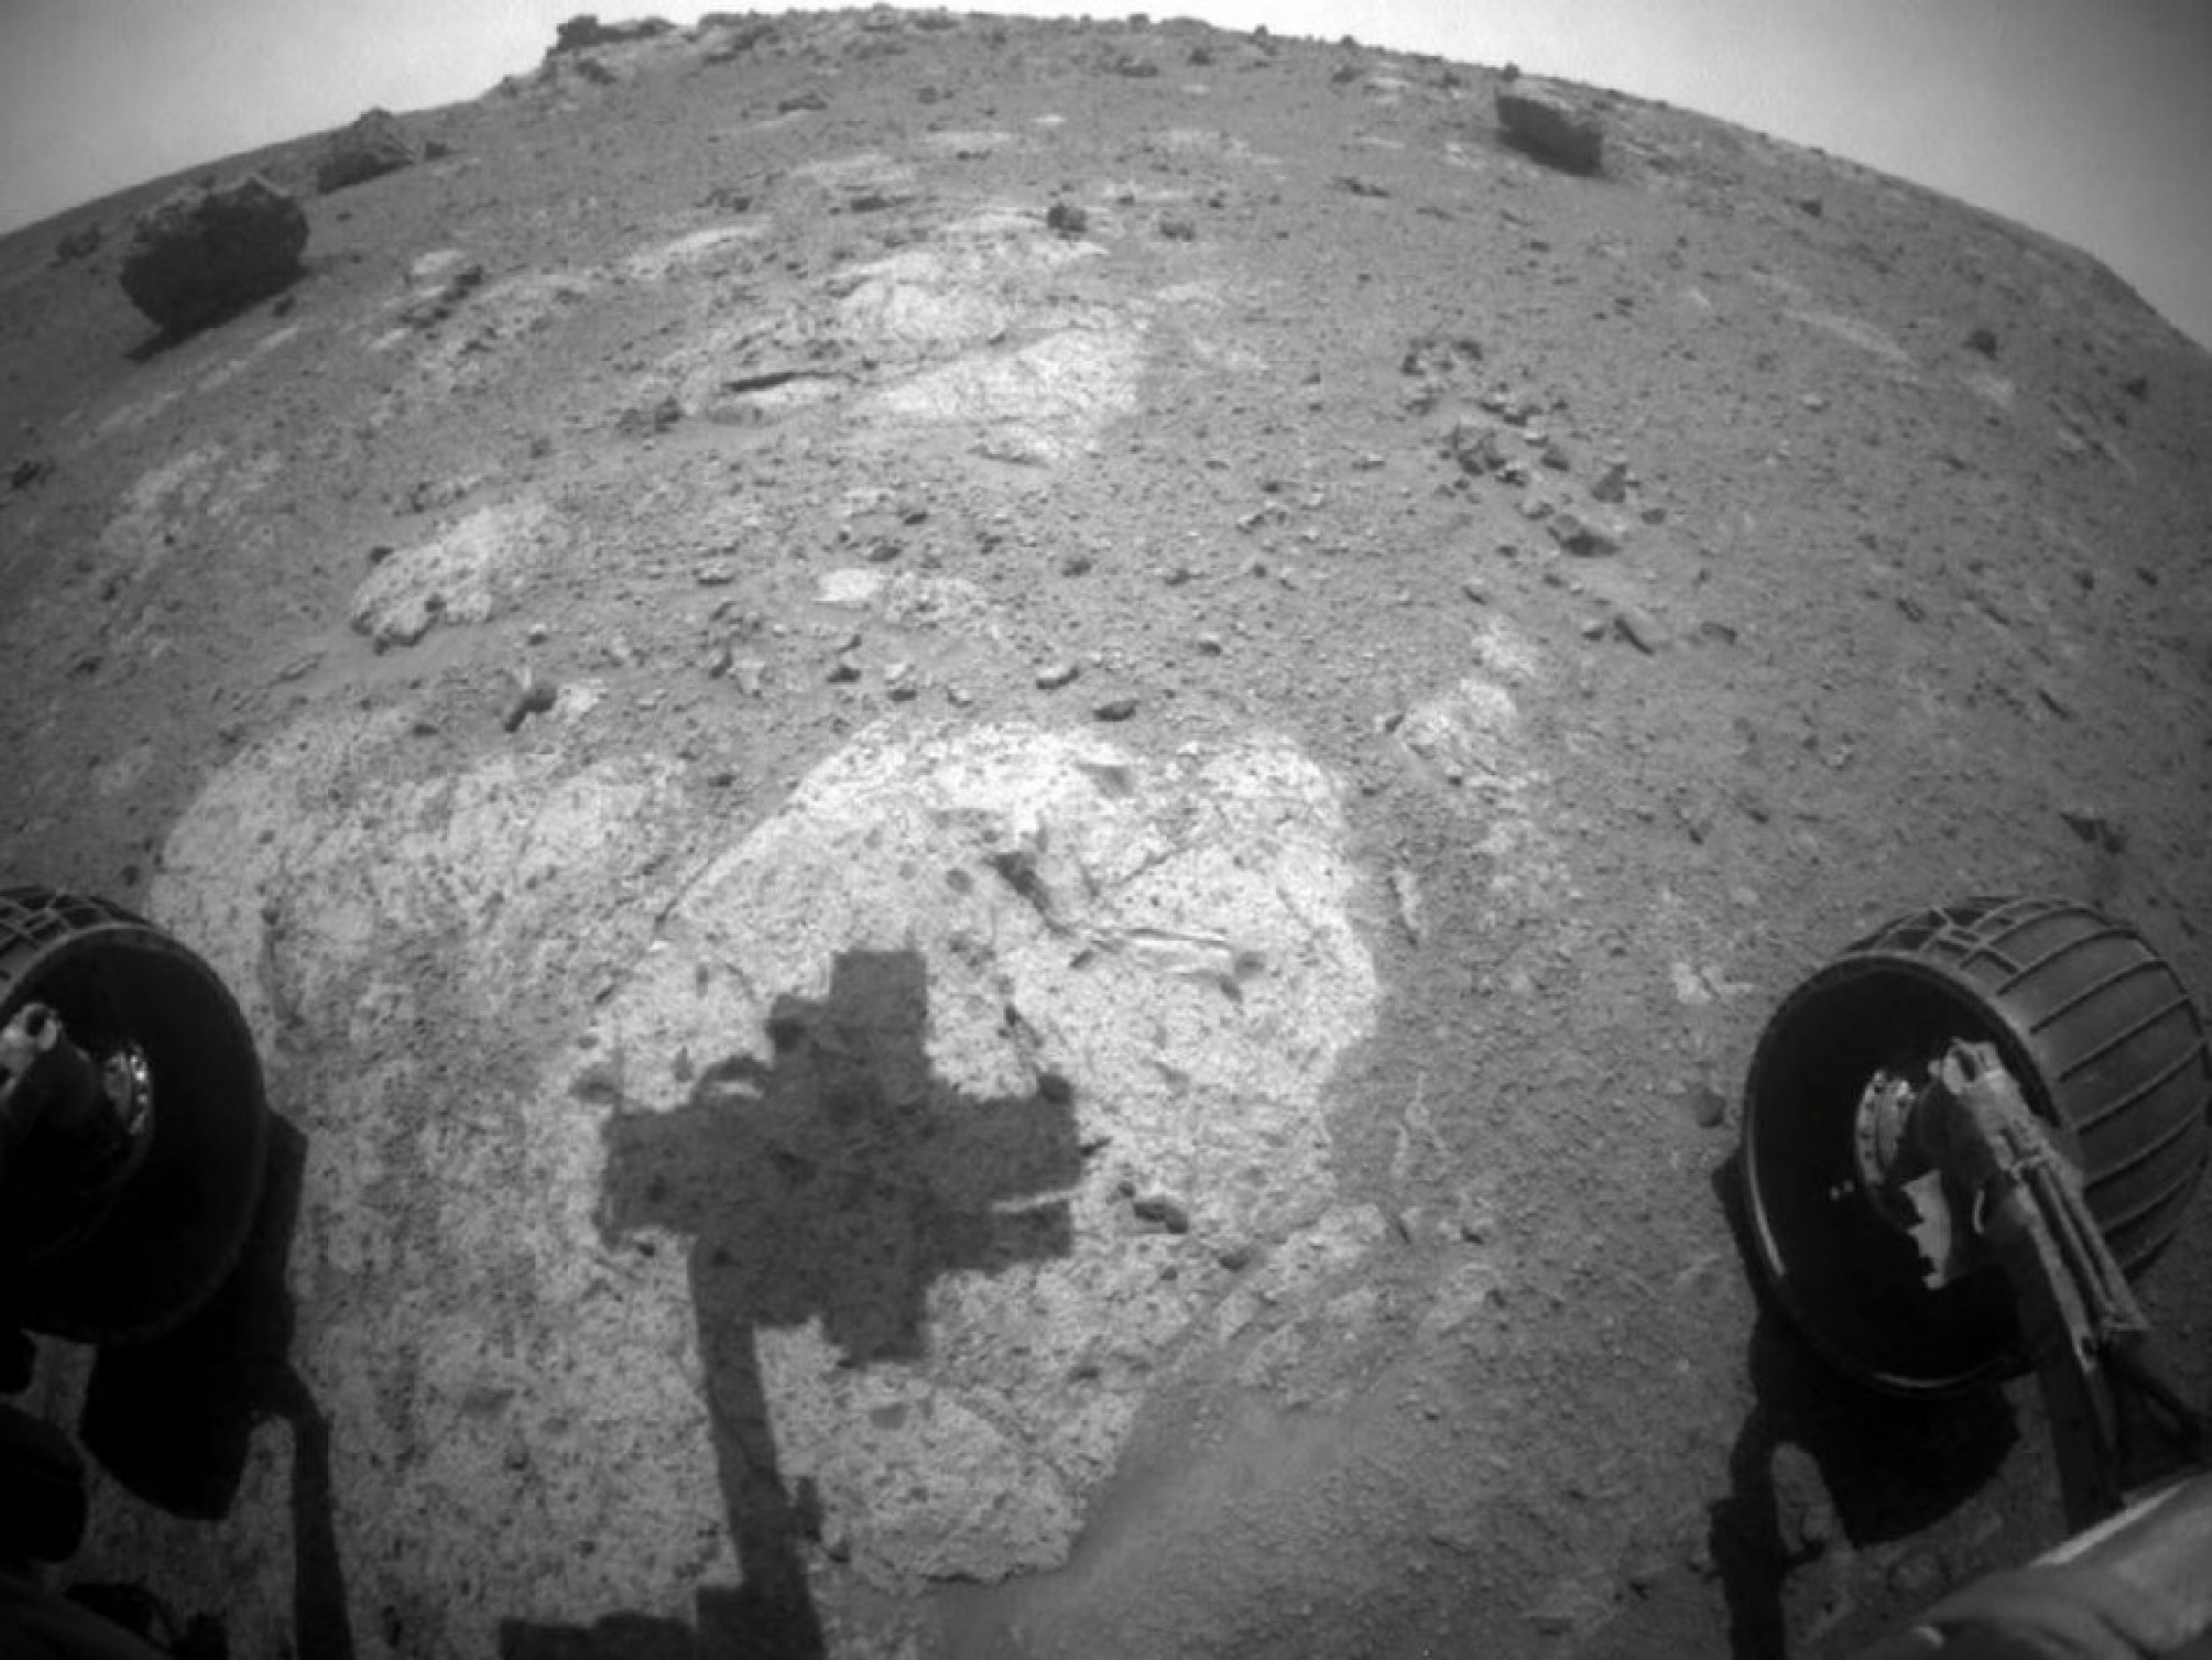 NASAs Rover Examines Second Rock at Mars Endeavour Crater